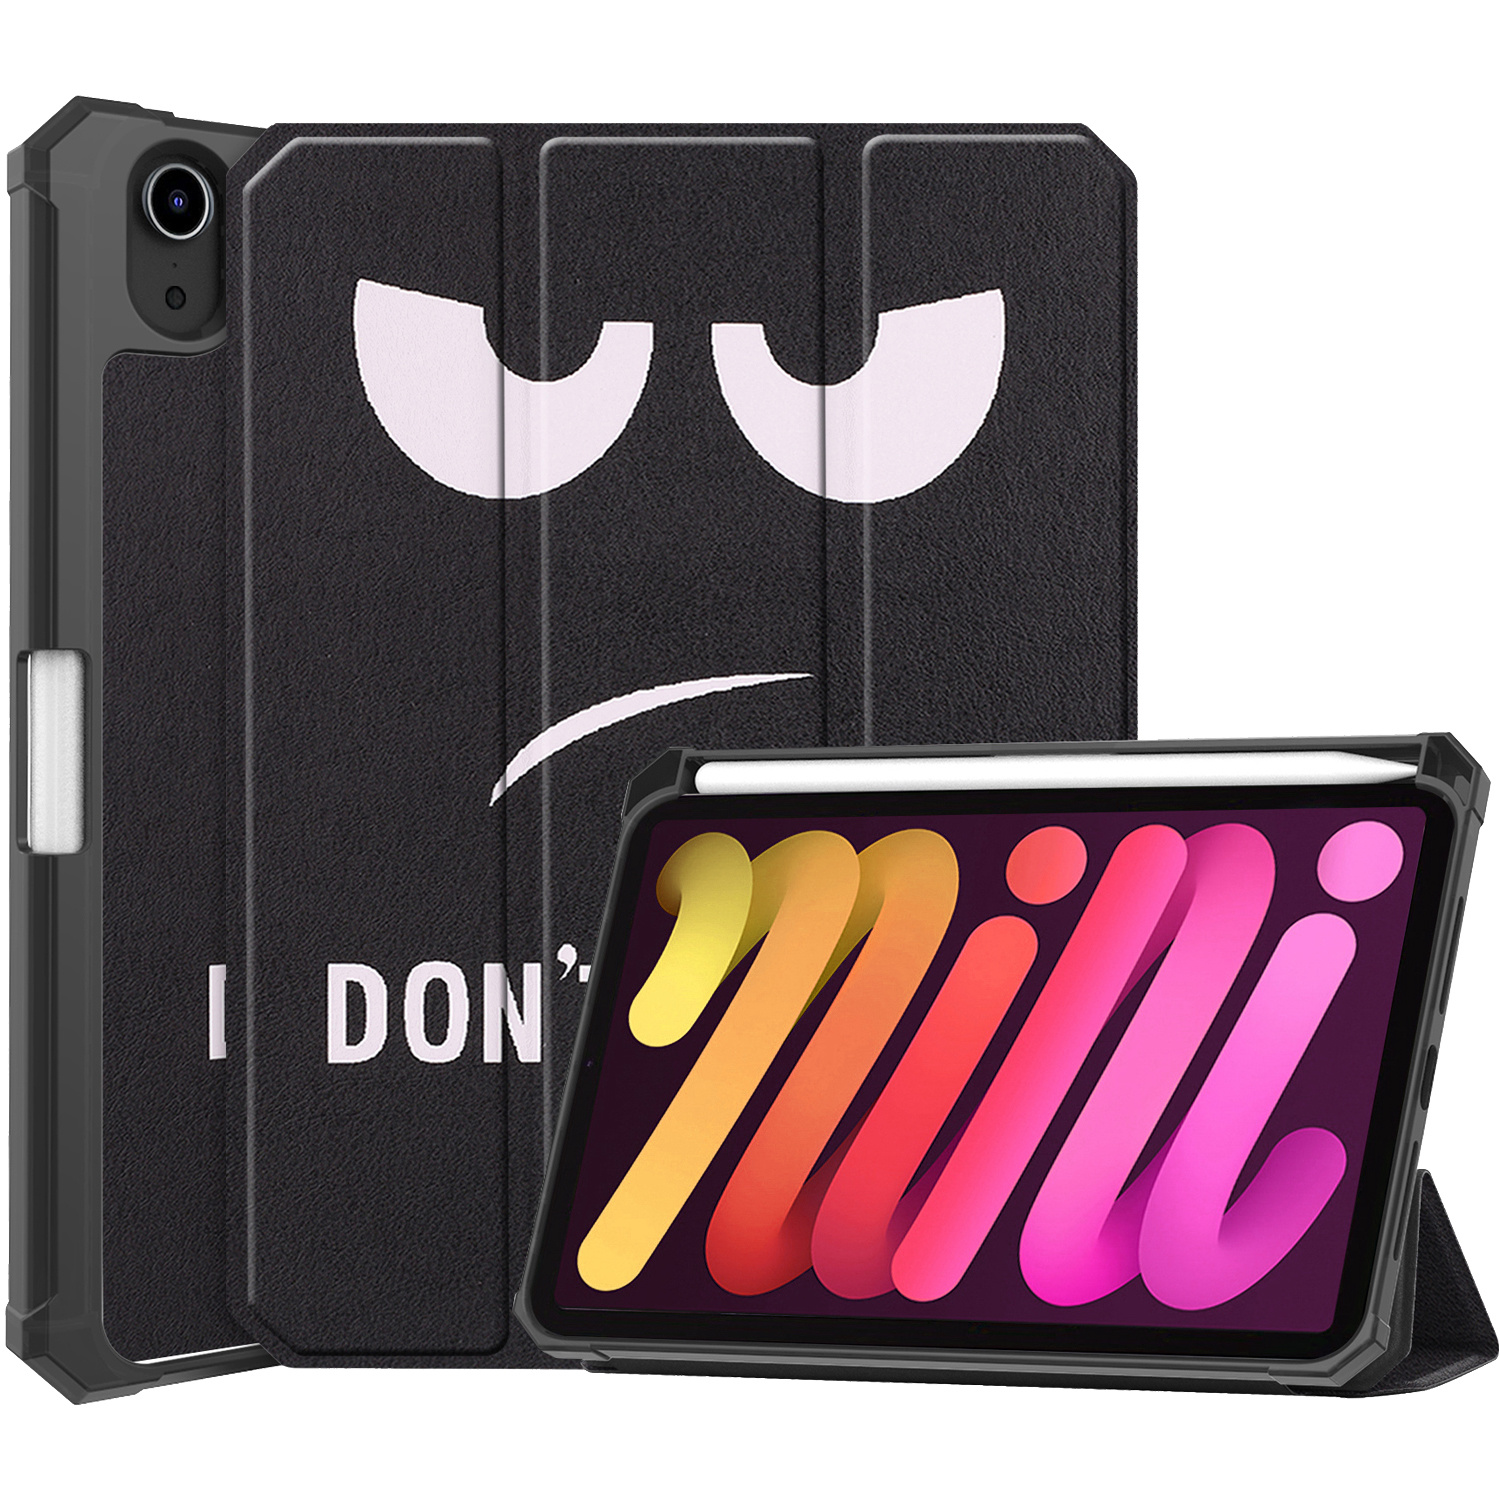 Nomfy iPad Mini 6 Hoesje Case Don't Touch Me - Hoes Met Uitsparing Apple Pencil - iPad Mini 6 Hoes Hardcover Hoesje Don't Touch Me Bookcase